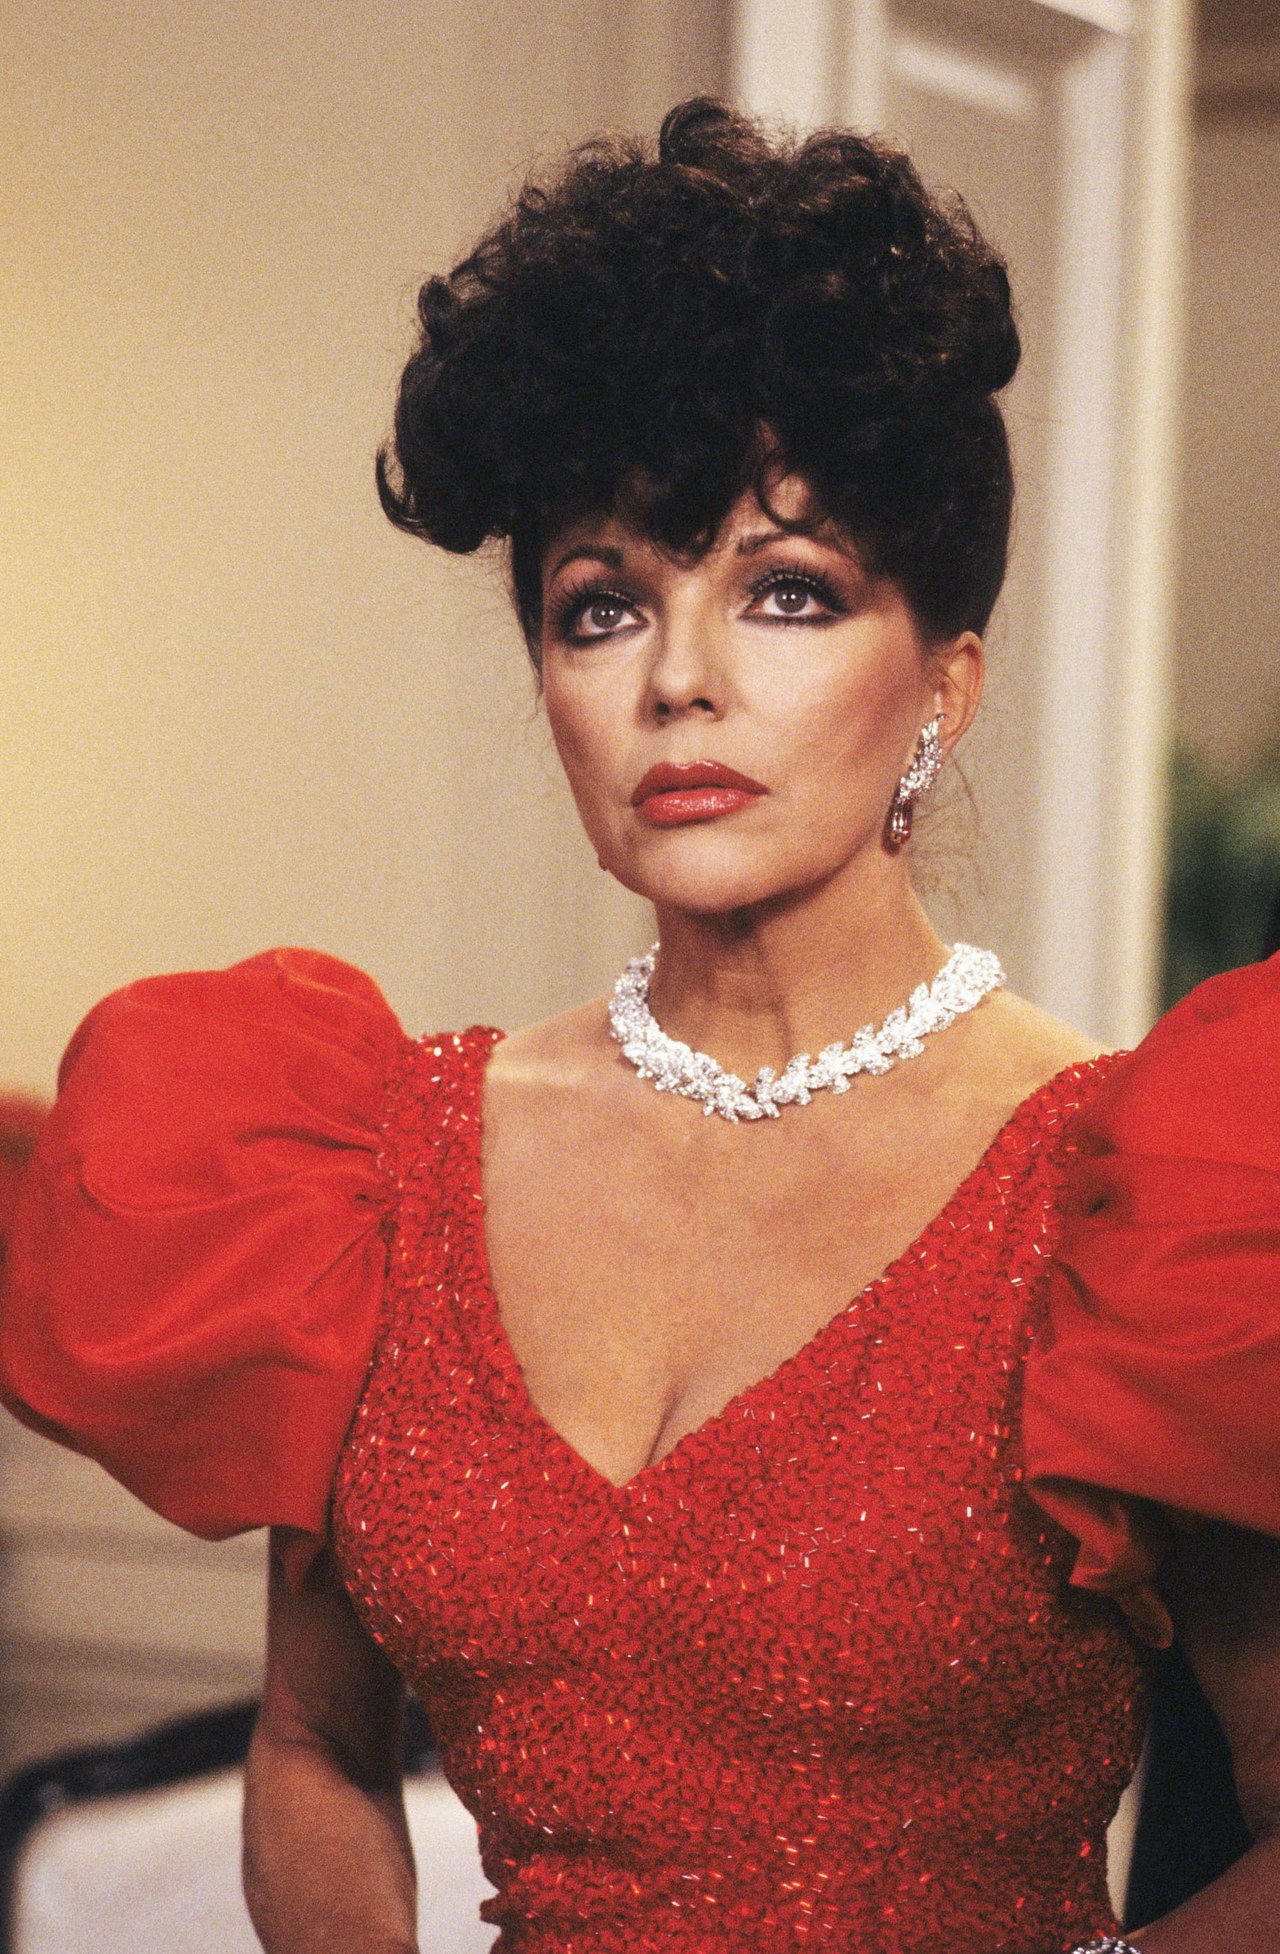 DYNASTIE, Joan Collins, 1981-1989. ©Aaron Spelling Prod./Courtesy Everett Collection